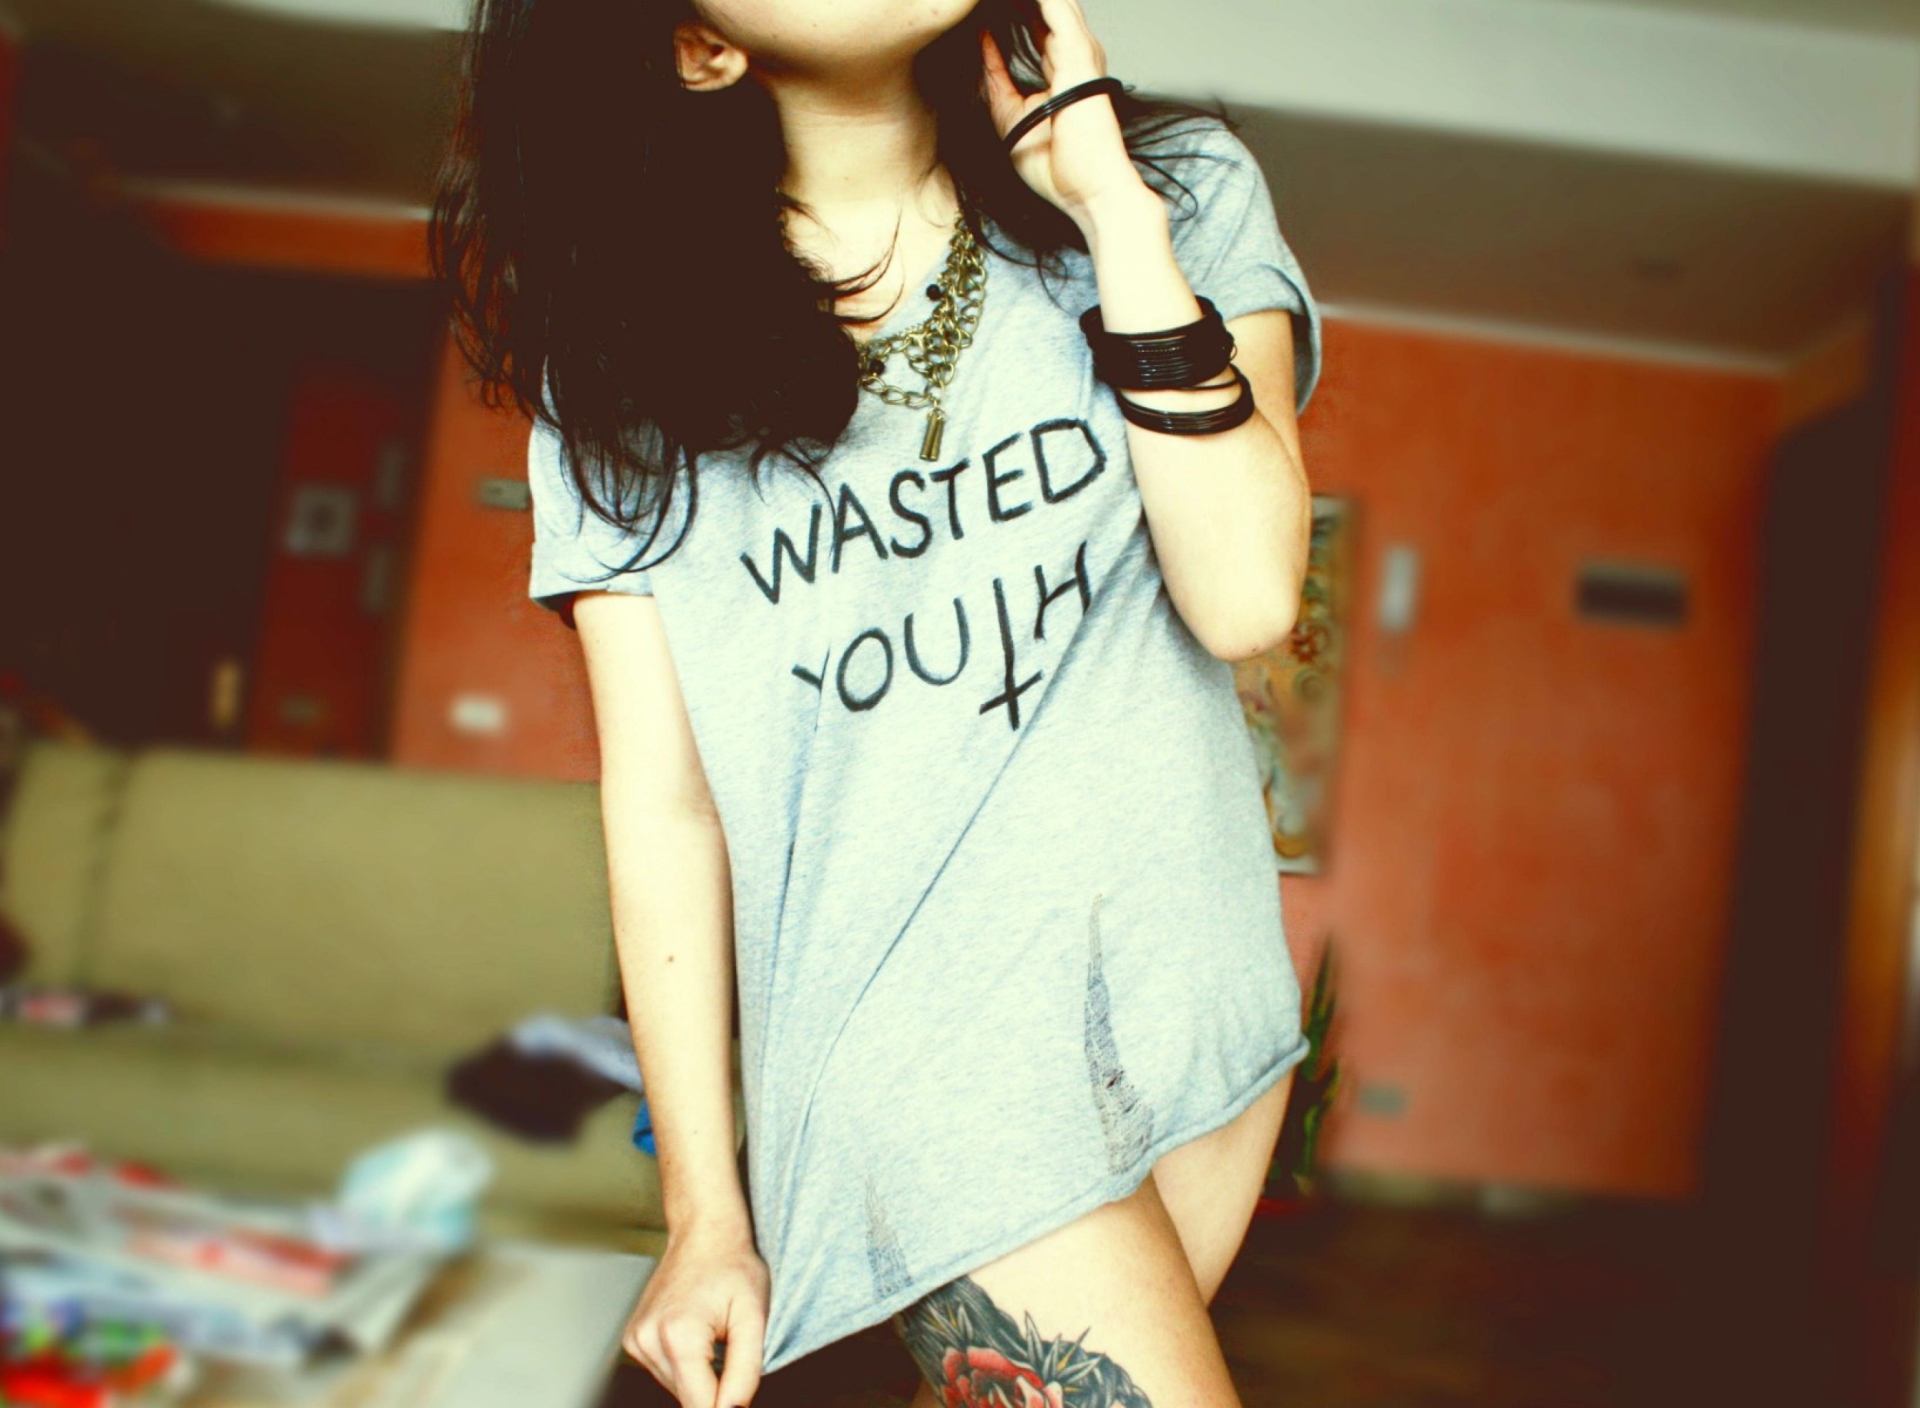 Wasted Youth T-Shirt wallpaper 1920x1408